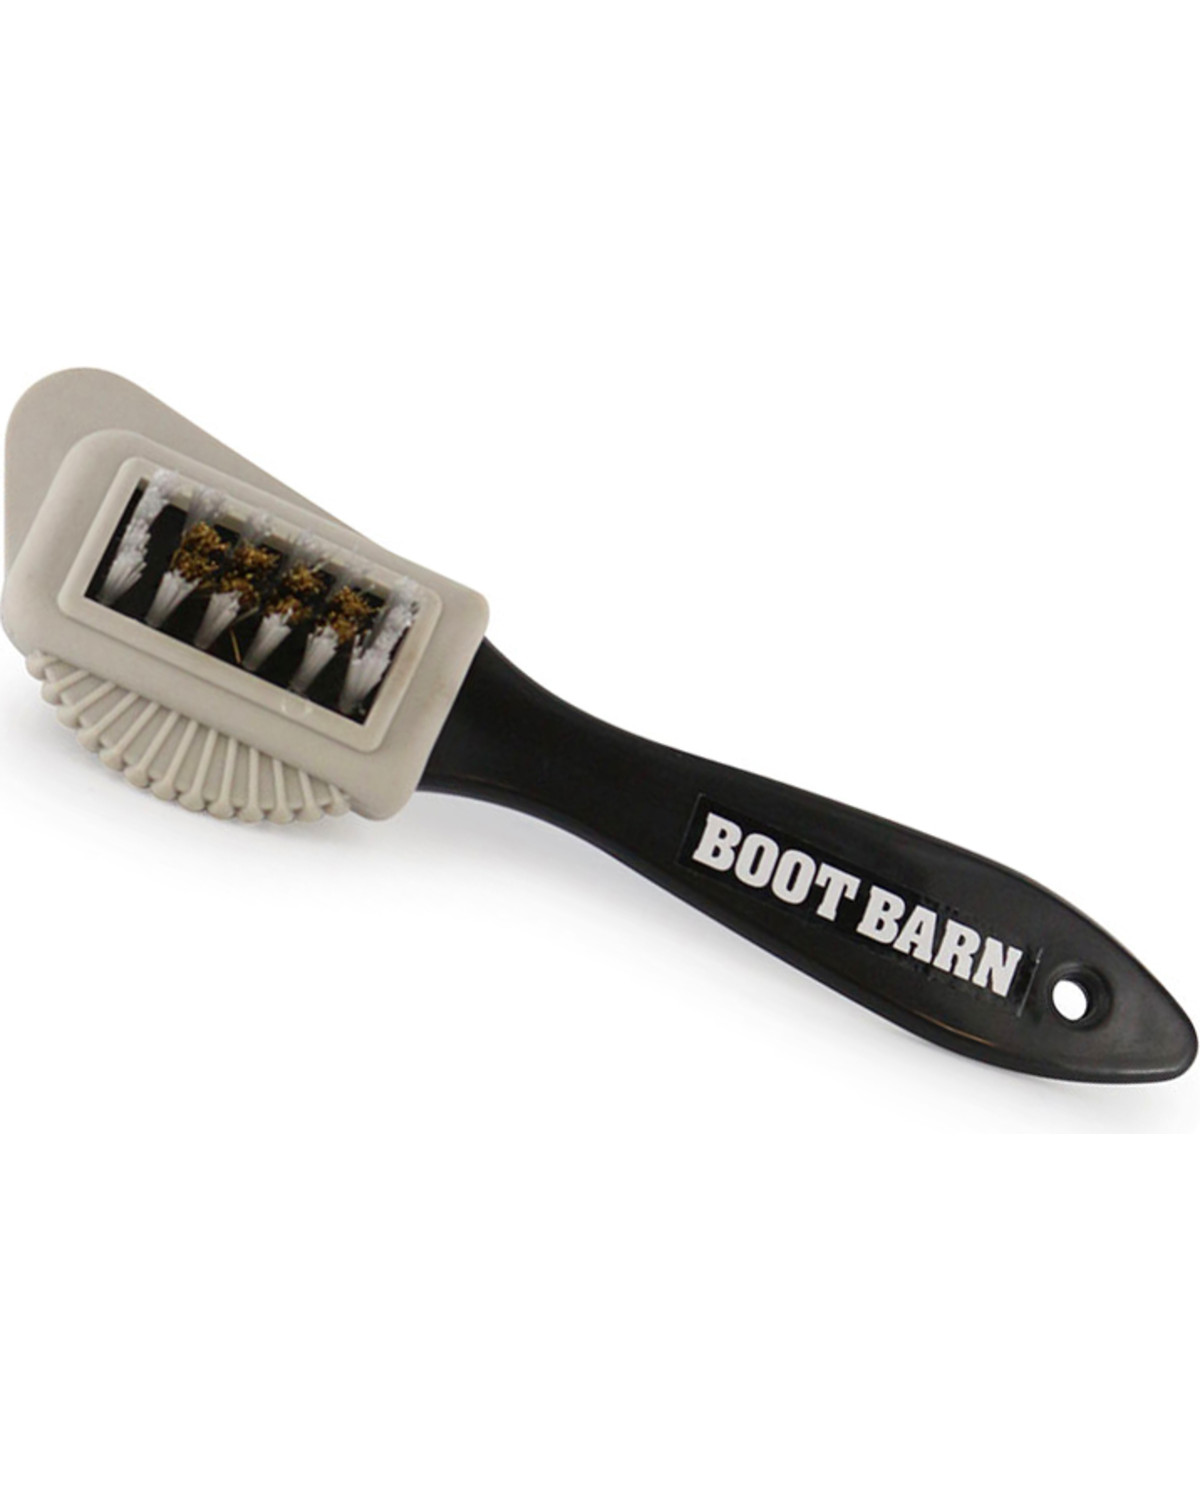 Boot Barn® Suede and Welt Cleaning Brush